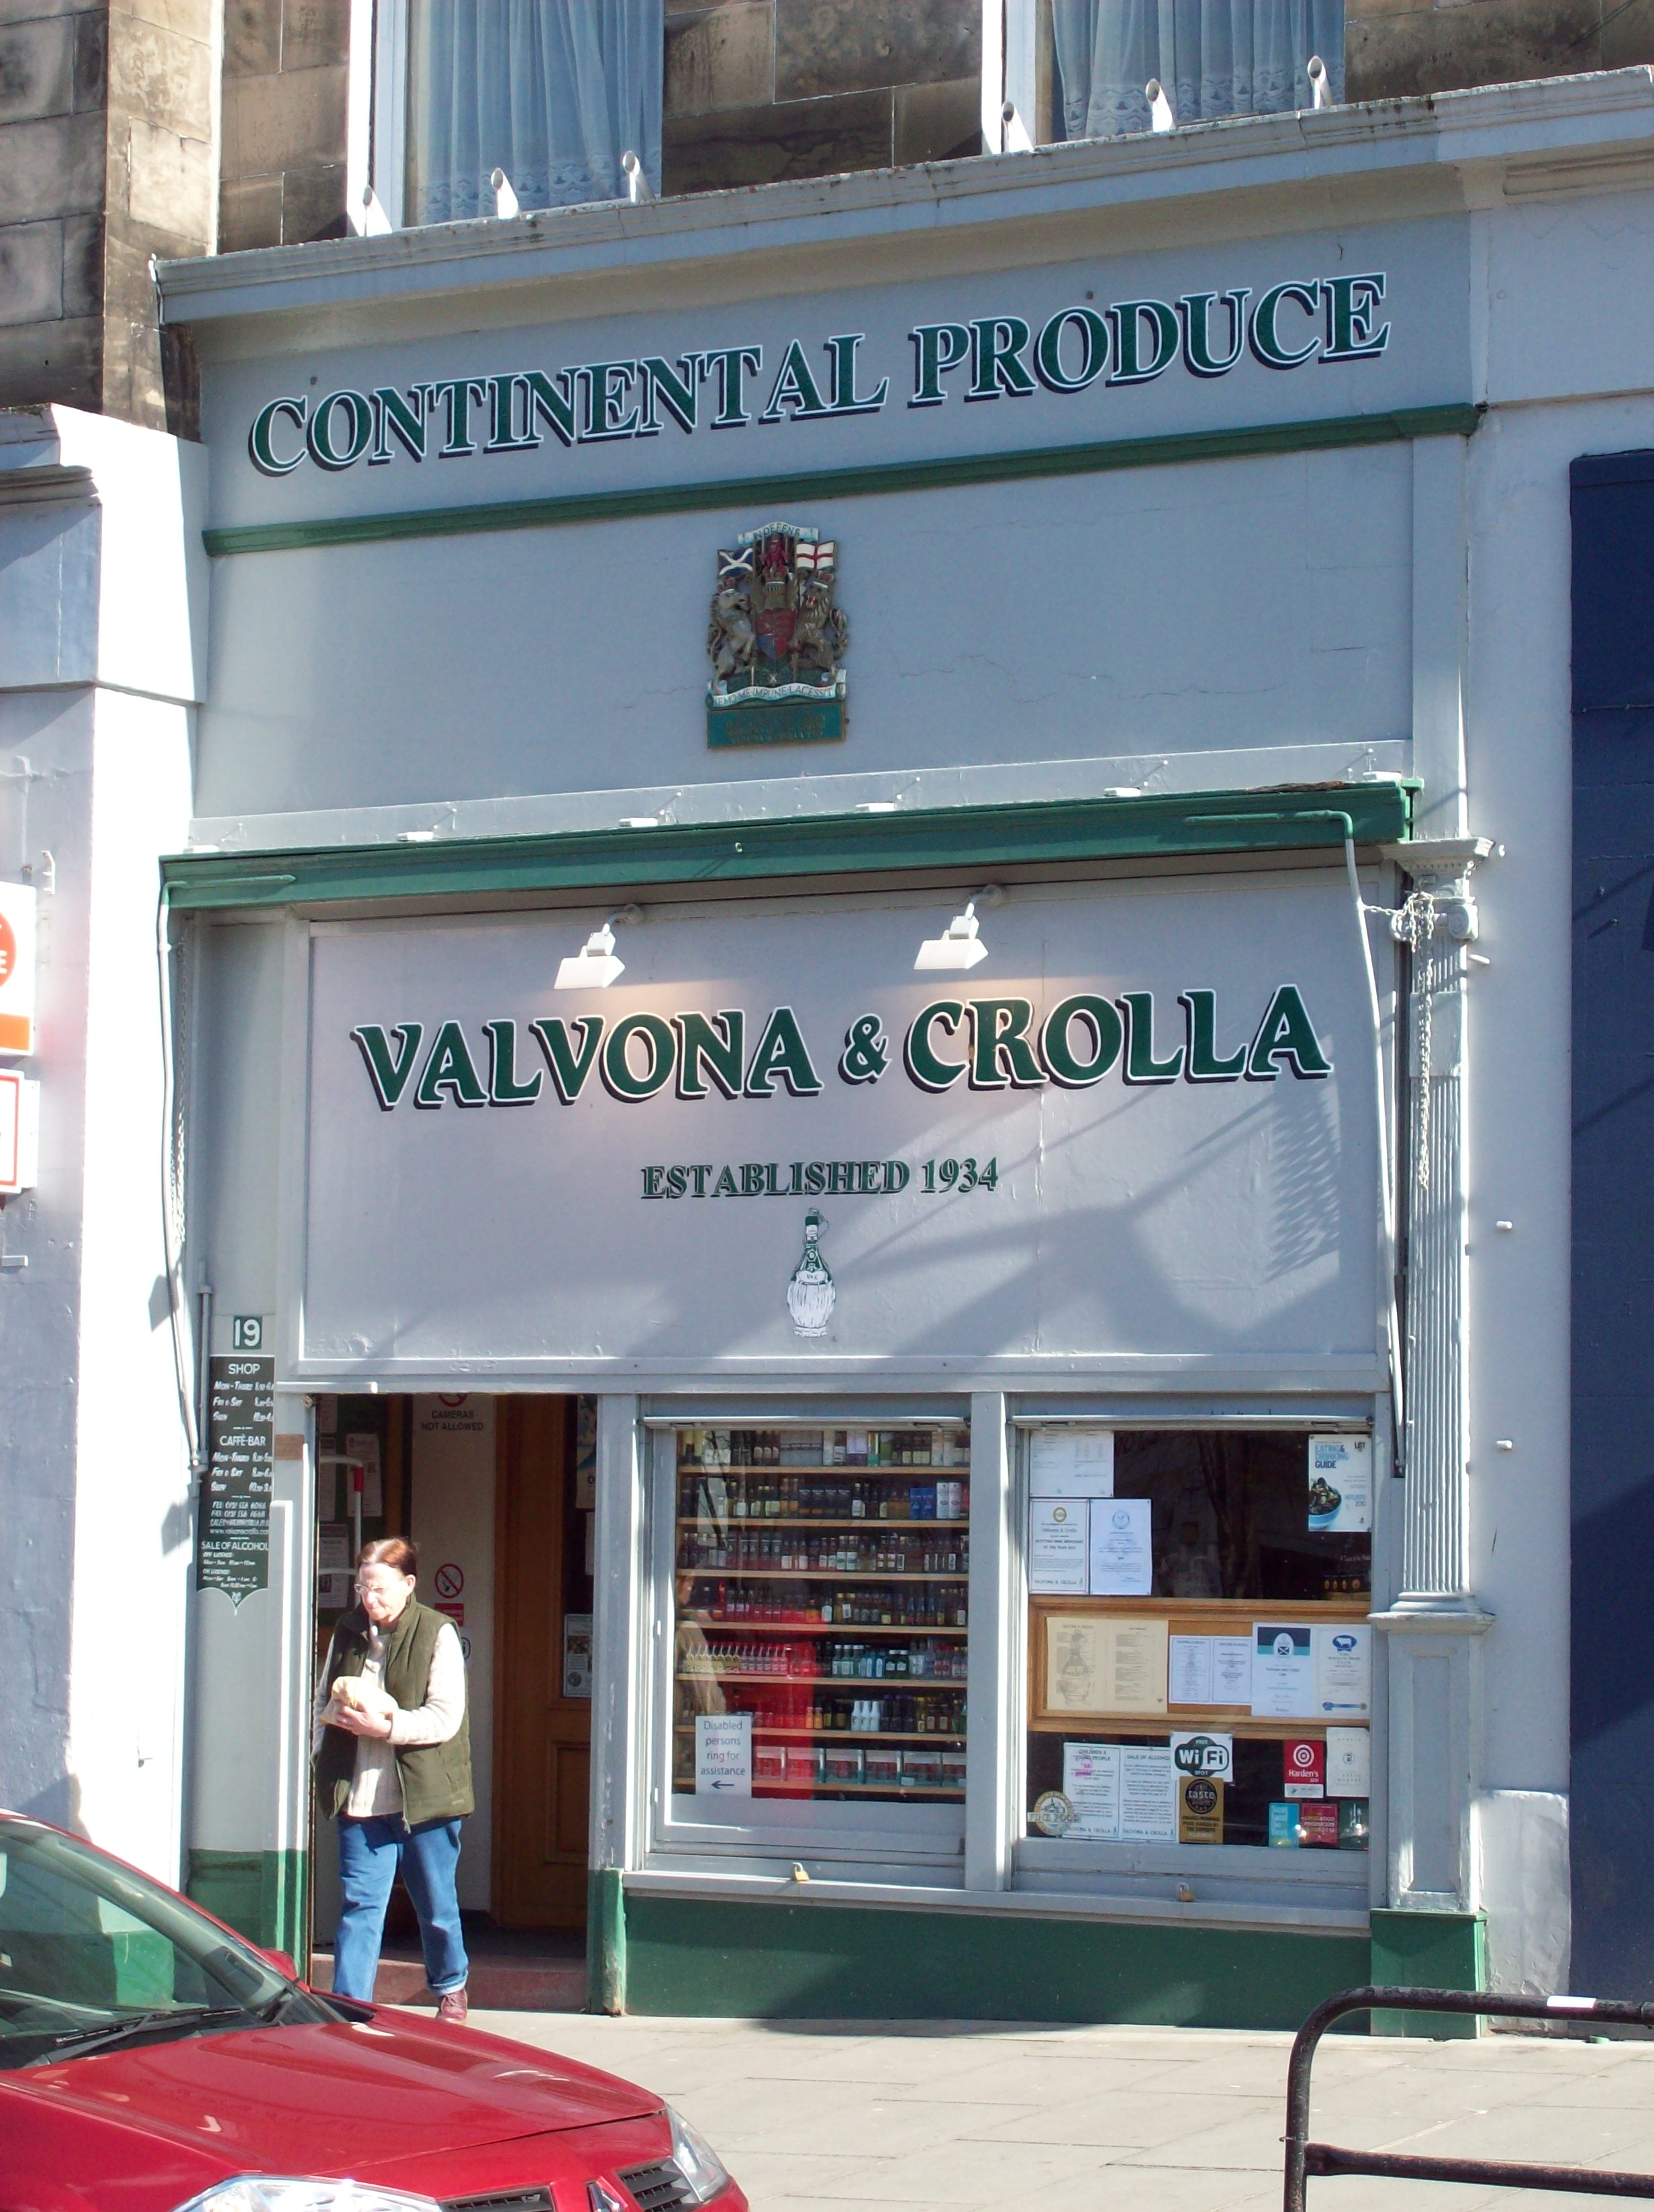 pale blue or blue-grey shopfront trimmed with grey-green, with an upper storey of brownish stone showing above; the shop window is crowded with notice-boards and shelves of miniature bottles and the pavement in front of the shop slopes noticeably down to the left